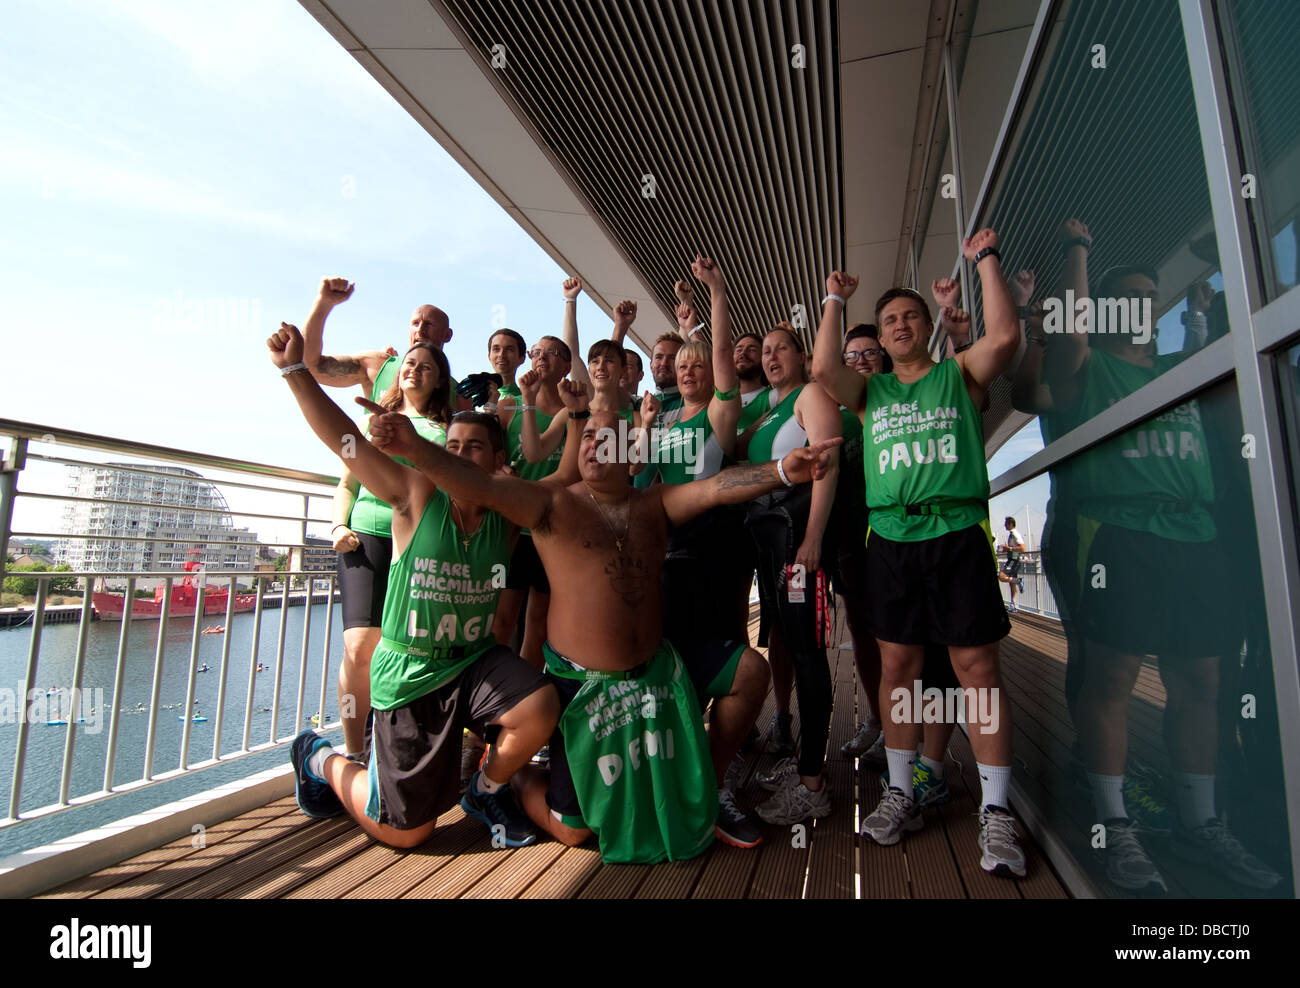 Stavros Flatley Joins teams of Macmillan supporters moment before their relay start at the 2013 , which included Gareth Thomas, Stock Photo